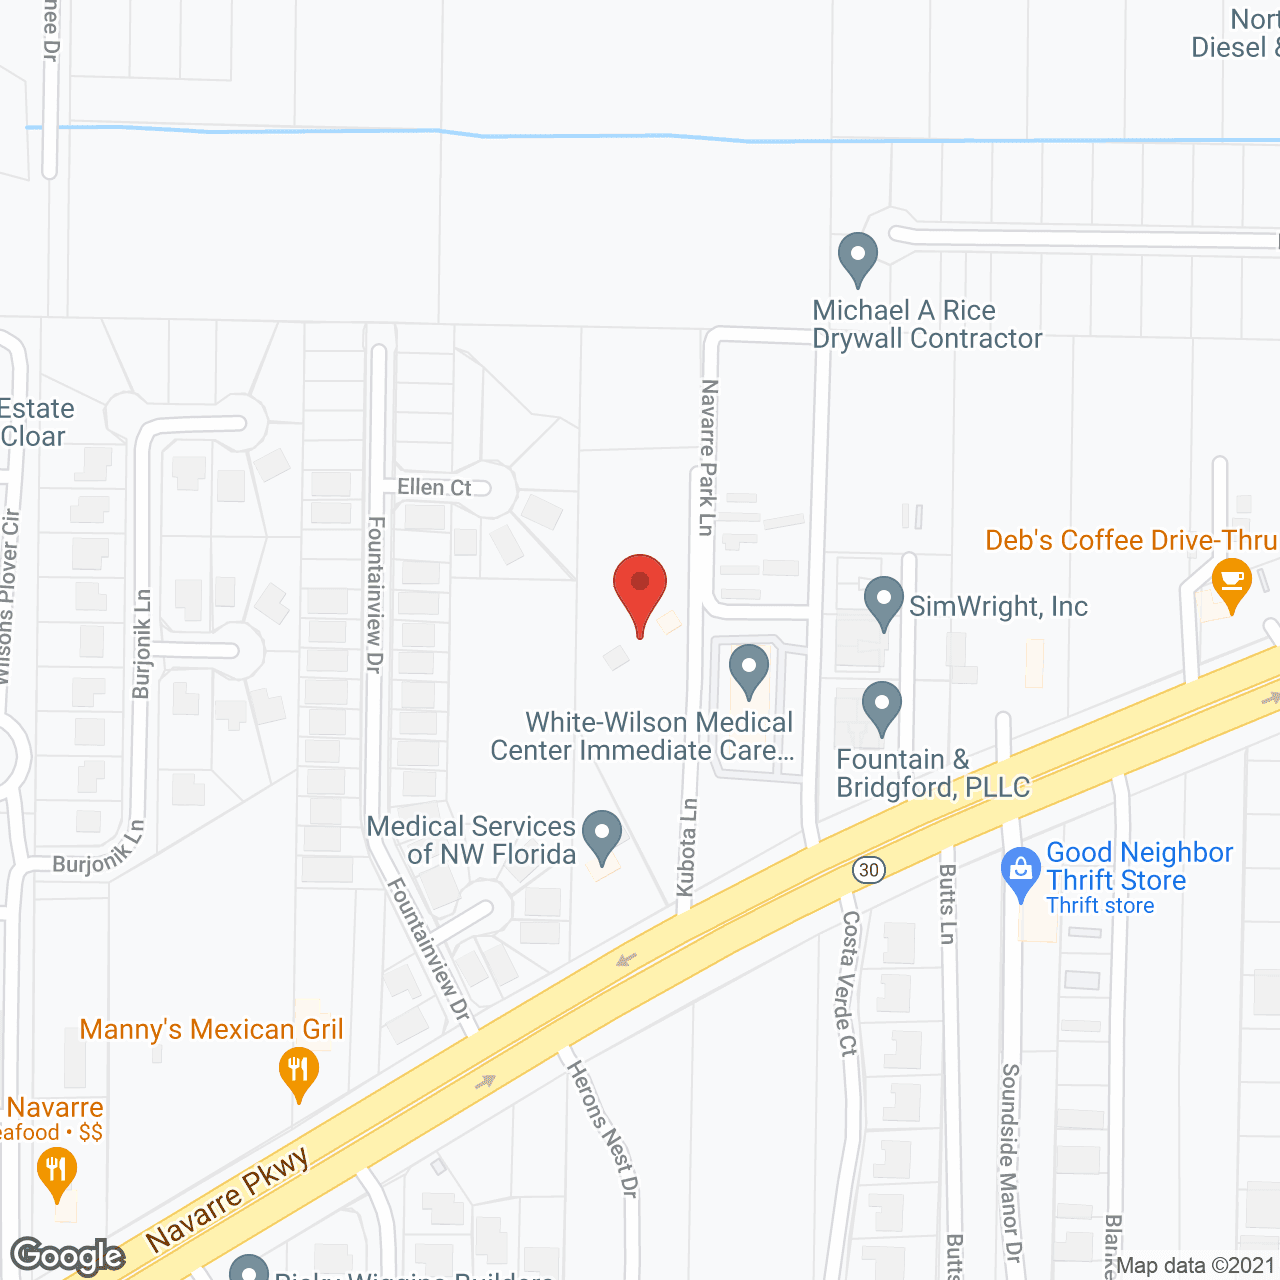 Medical Services Of Nw Florida in google map